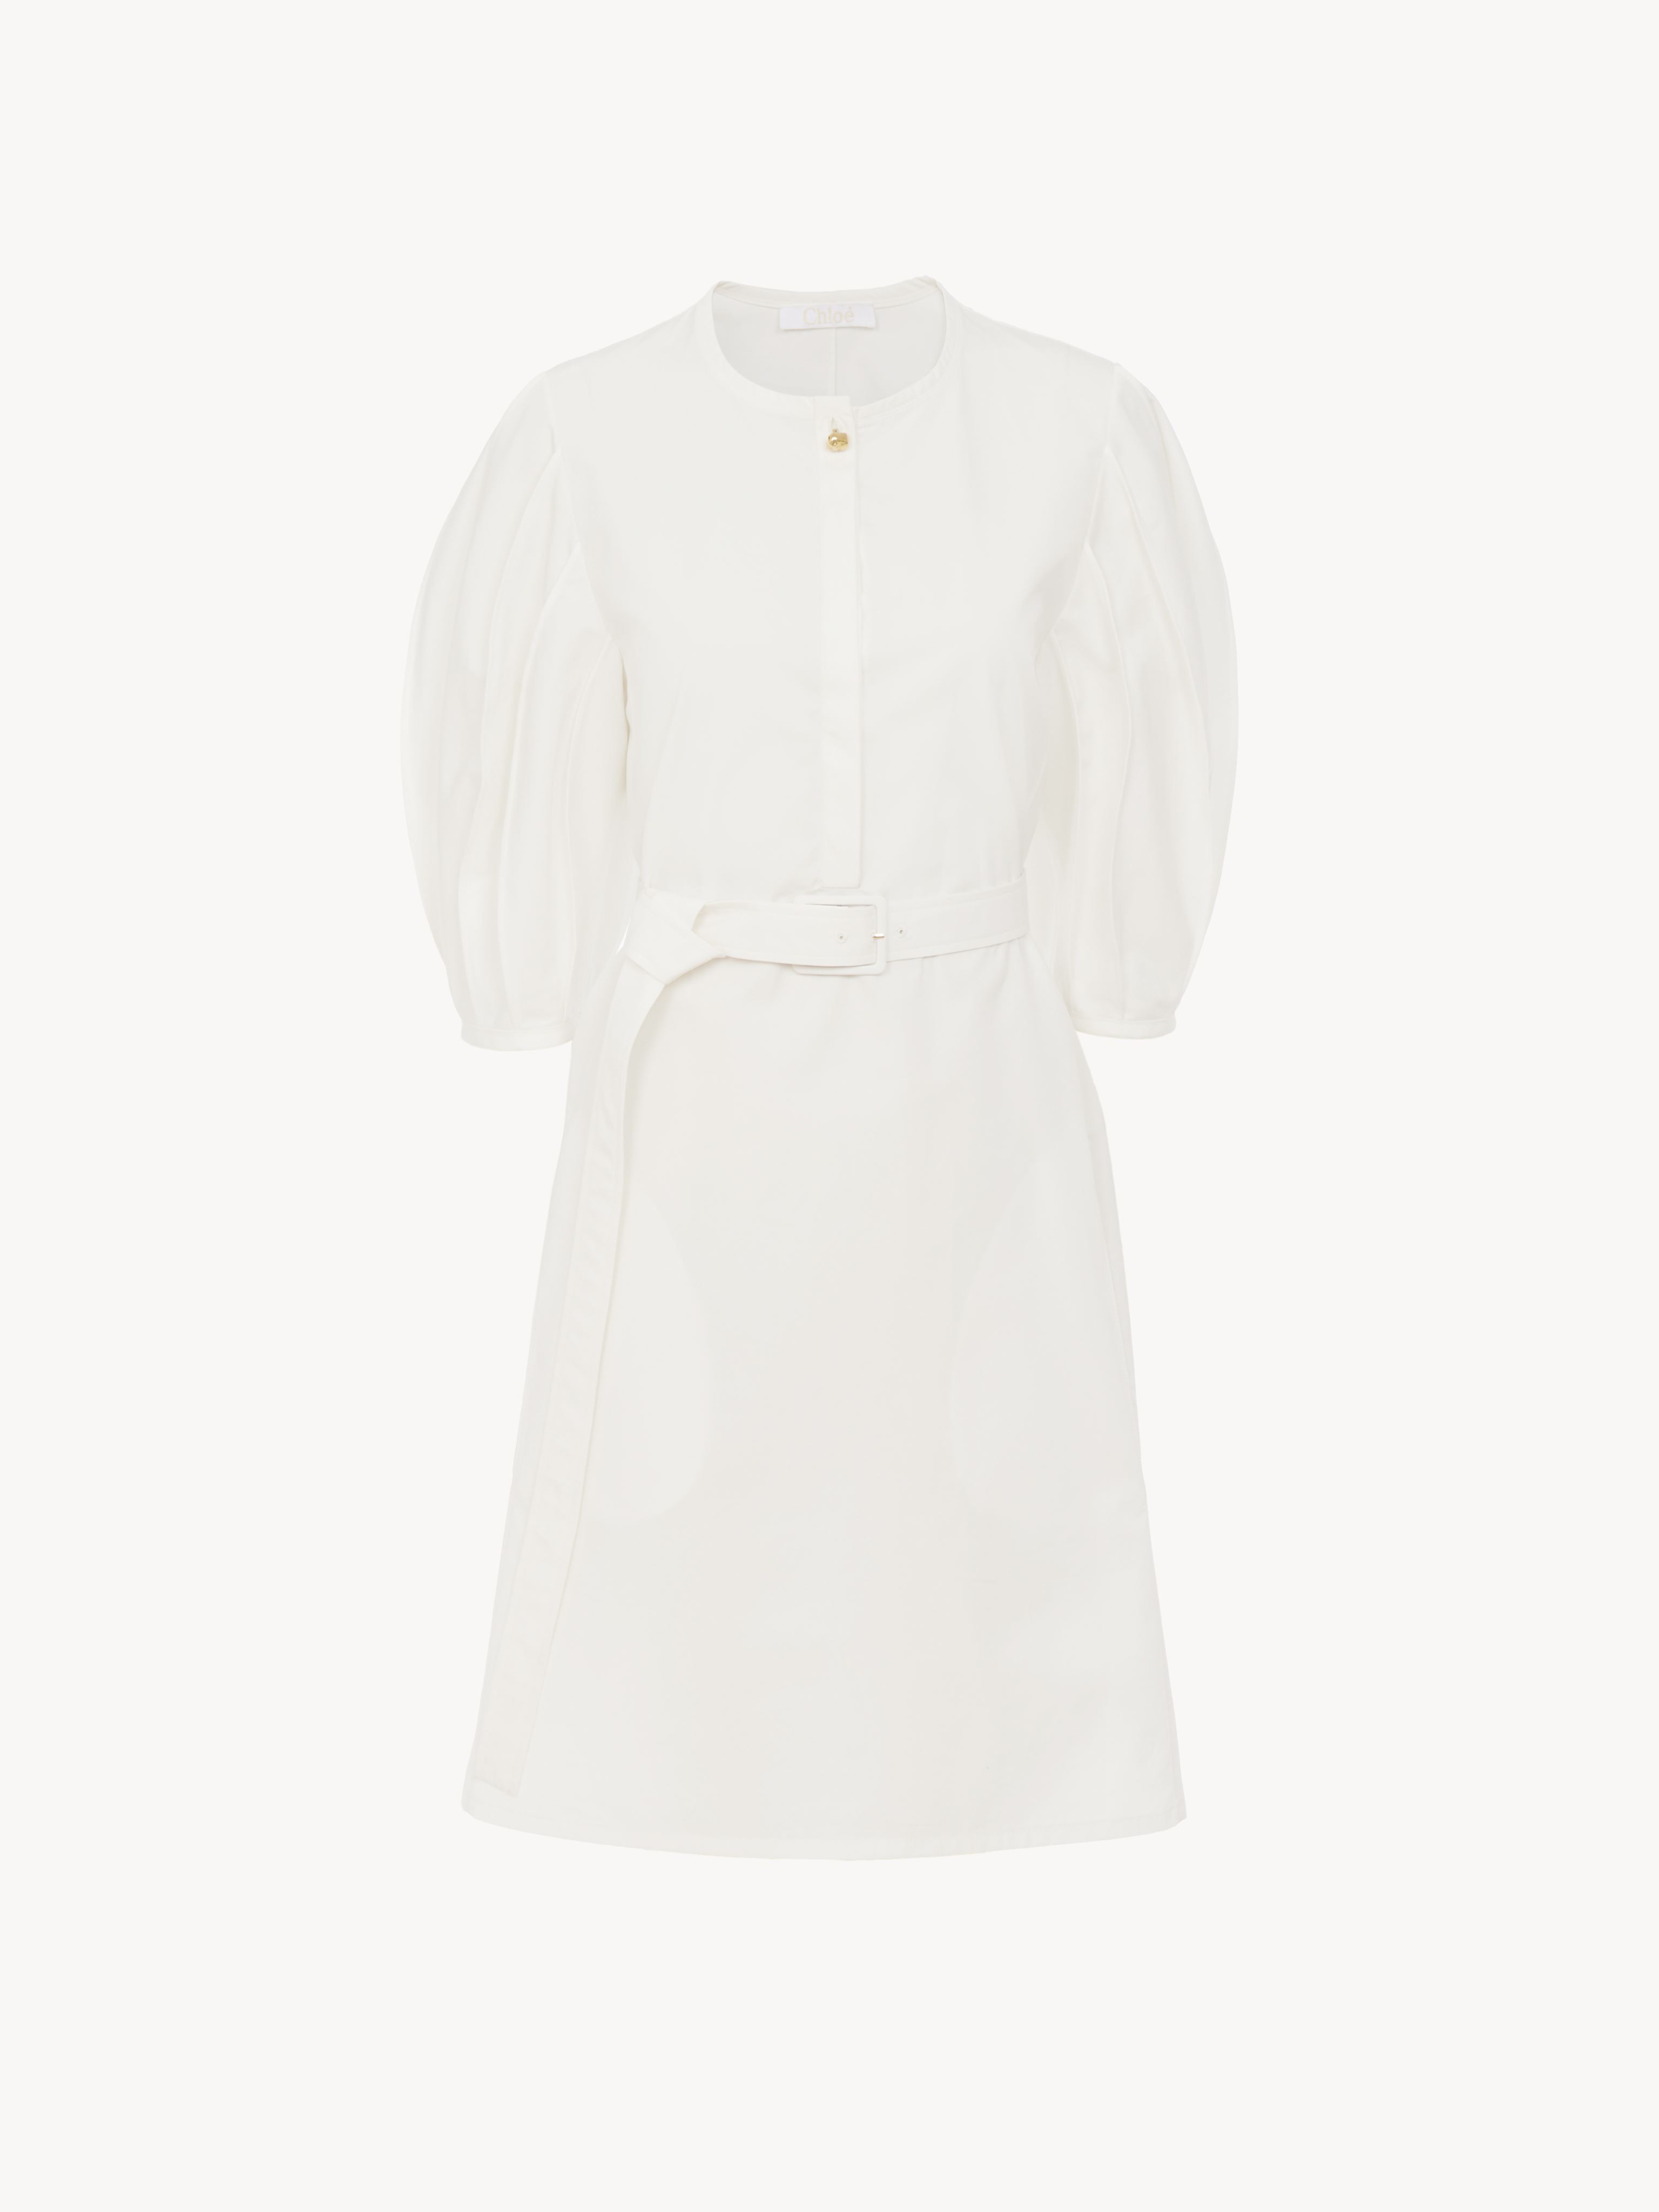 Chloé Robe Chemise Courte Manches « Lanterne » Femme Brun Taille 34 100% Coton, Pinctada Maxima, Farmed, C In Brown